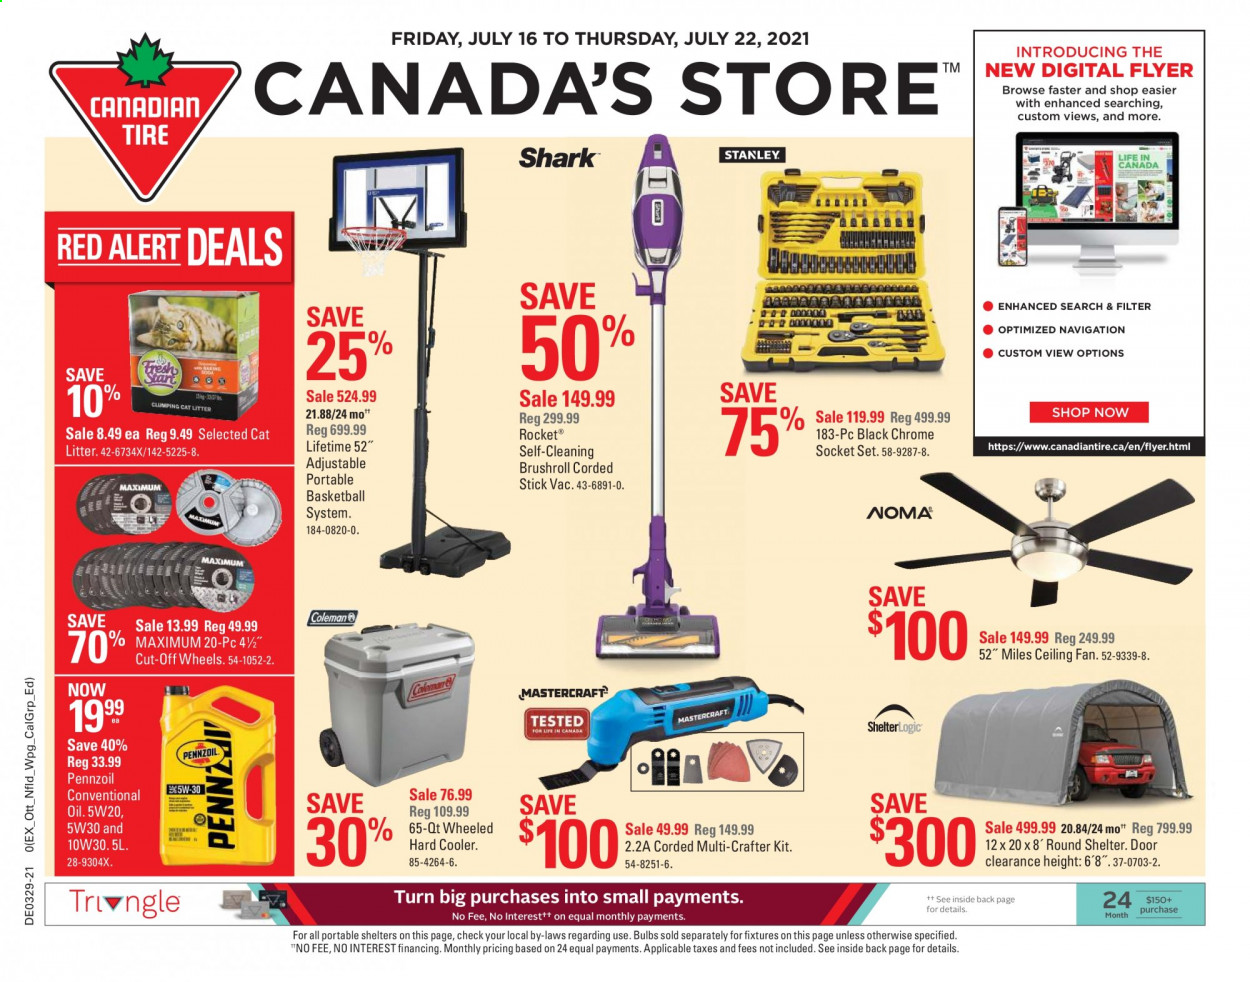 thumbnail - Canadian Tire Flyer - July 16, 2021 - July 22, 2021 - Sales products - bulb, ceiling fan, portable basketball system, basketball, rocket, socket, grinding wheel, socket set, conventional oil, Pennzoil. Page 1.